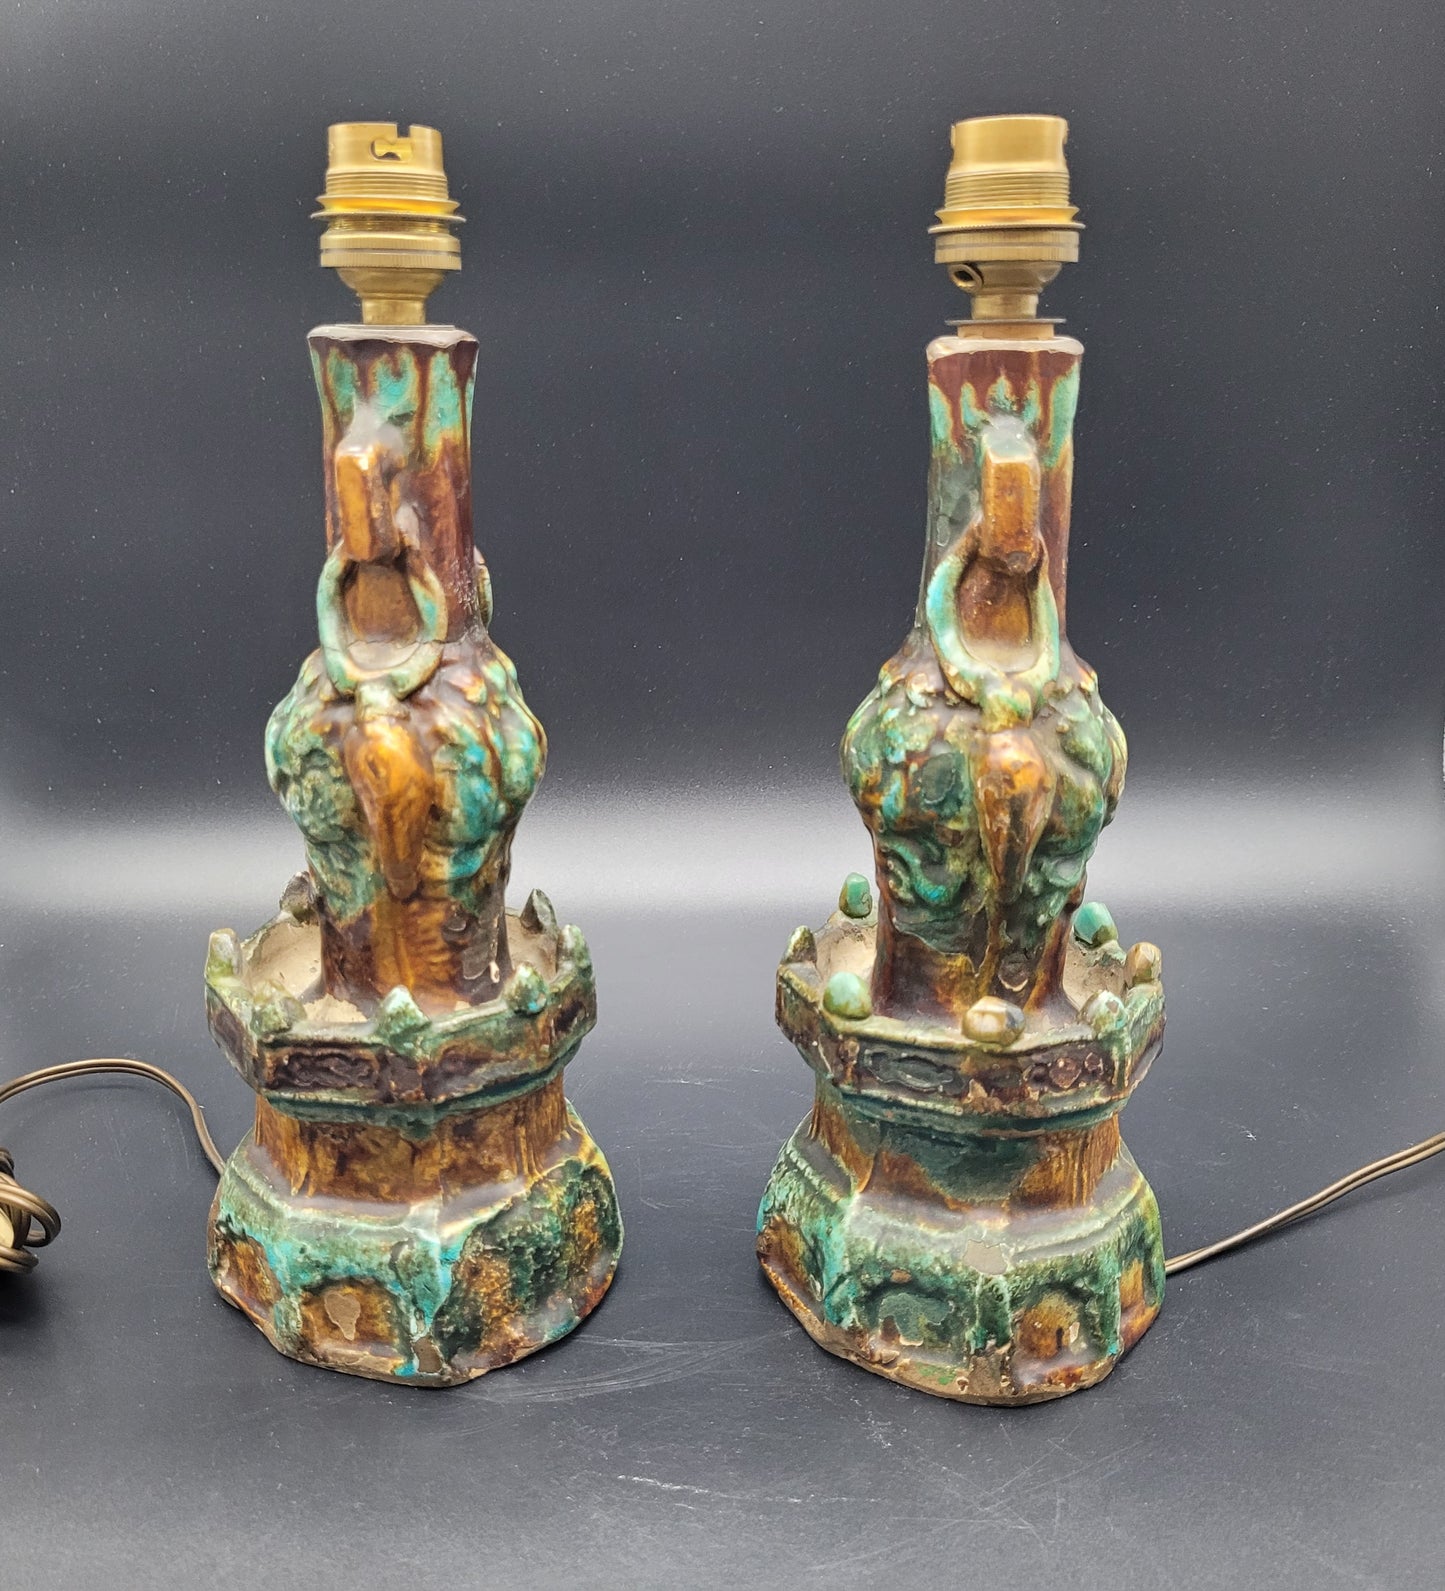 ANTIQUES & COLLECTABLE UK Chinese Ming Dynasty Pottery Candle Sticks 16th / 17th Century